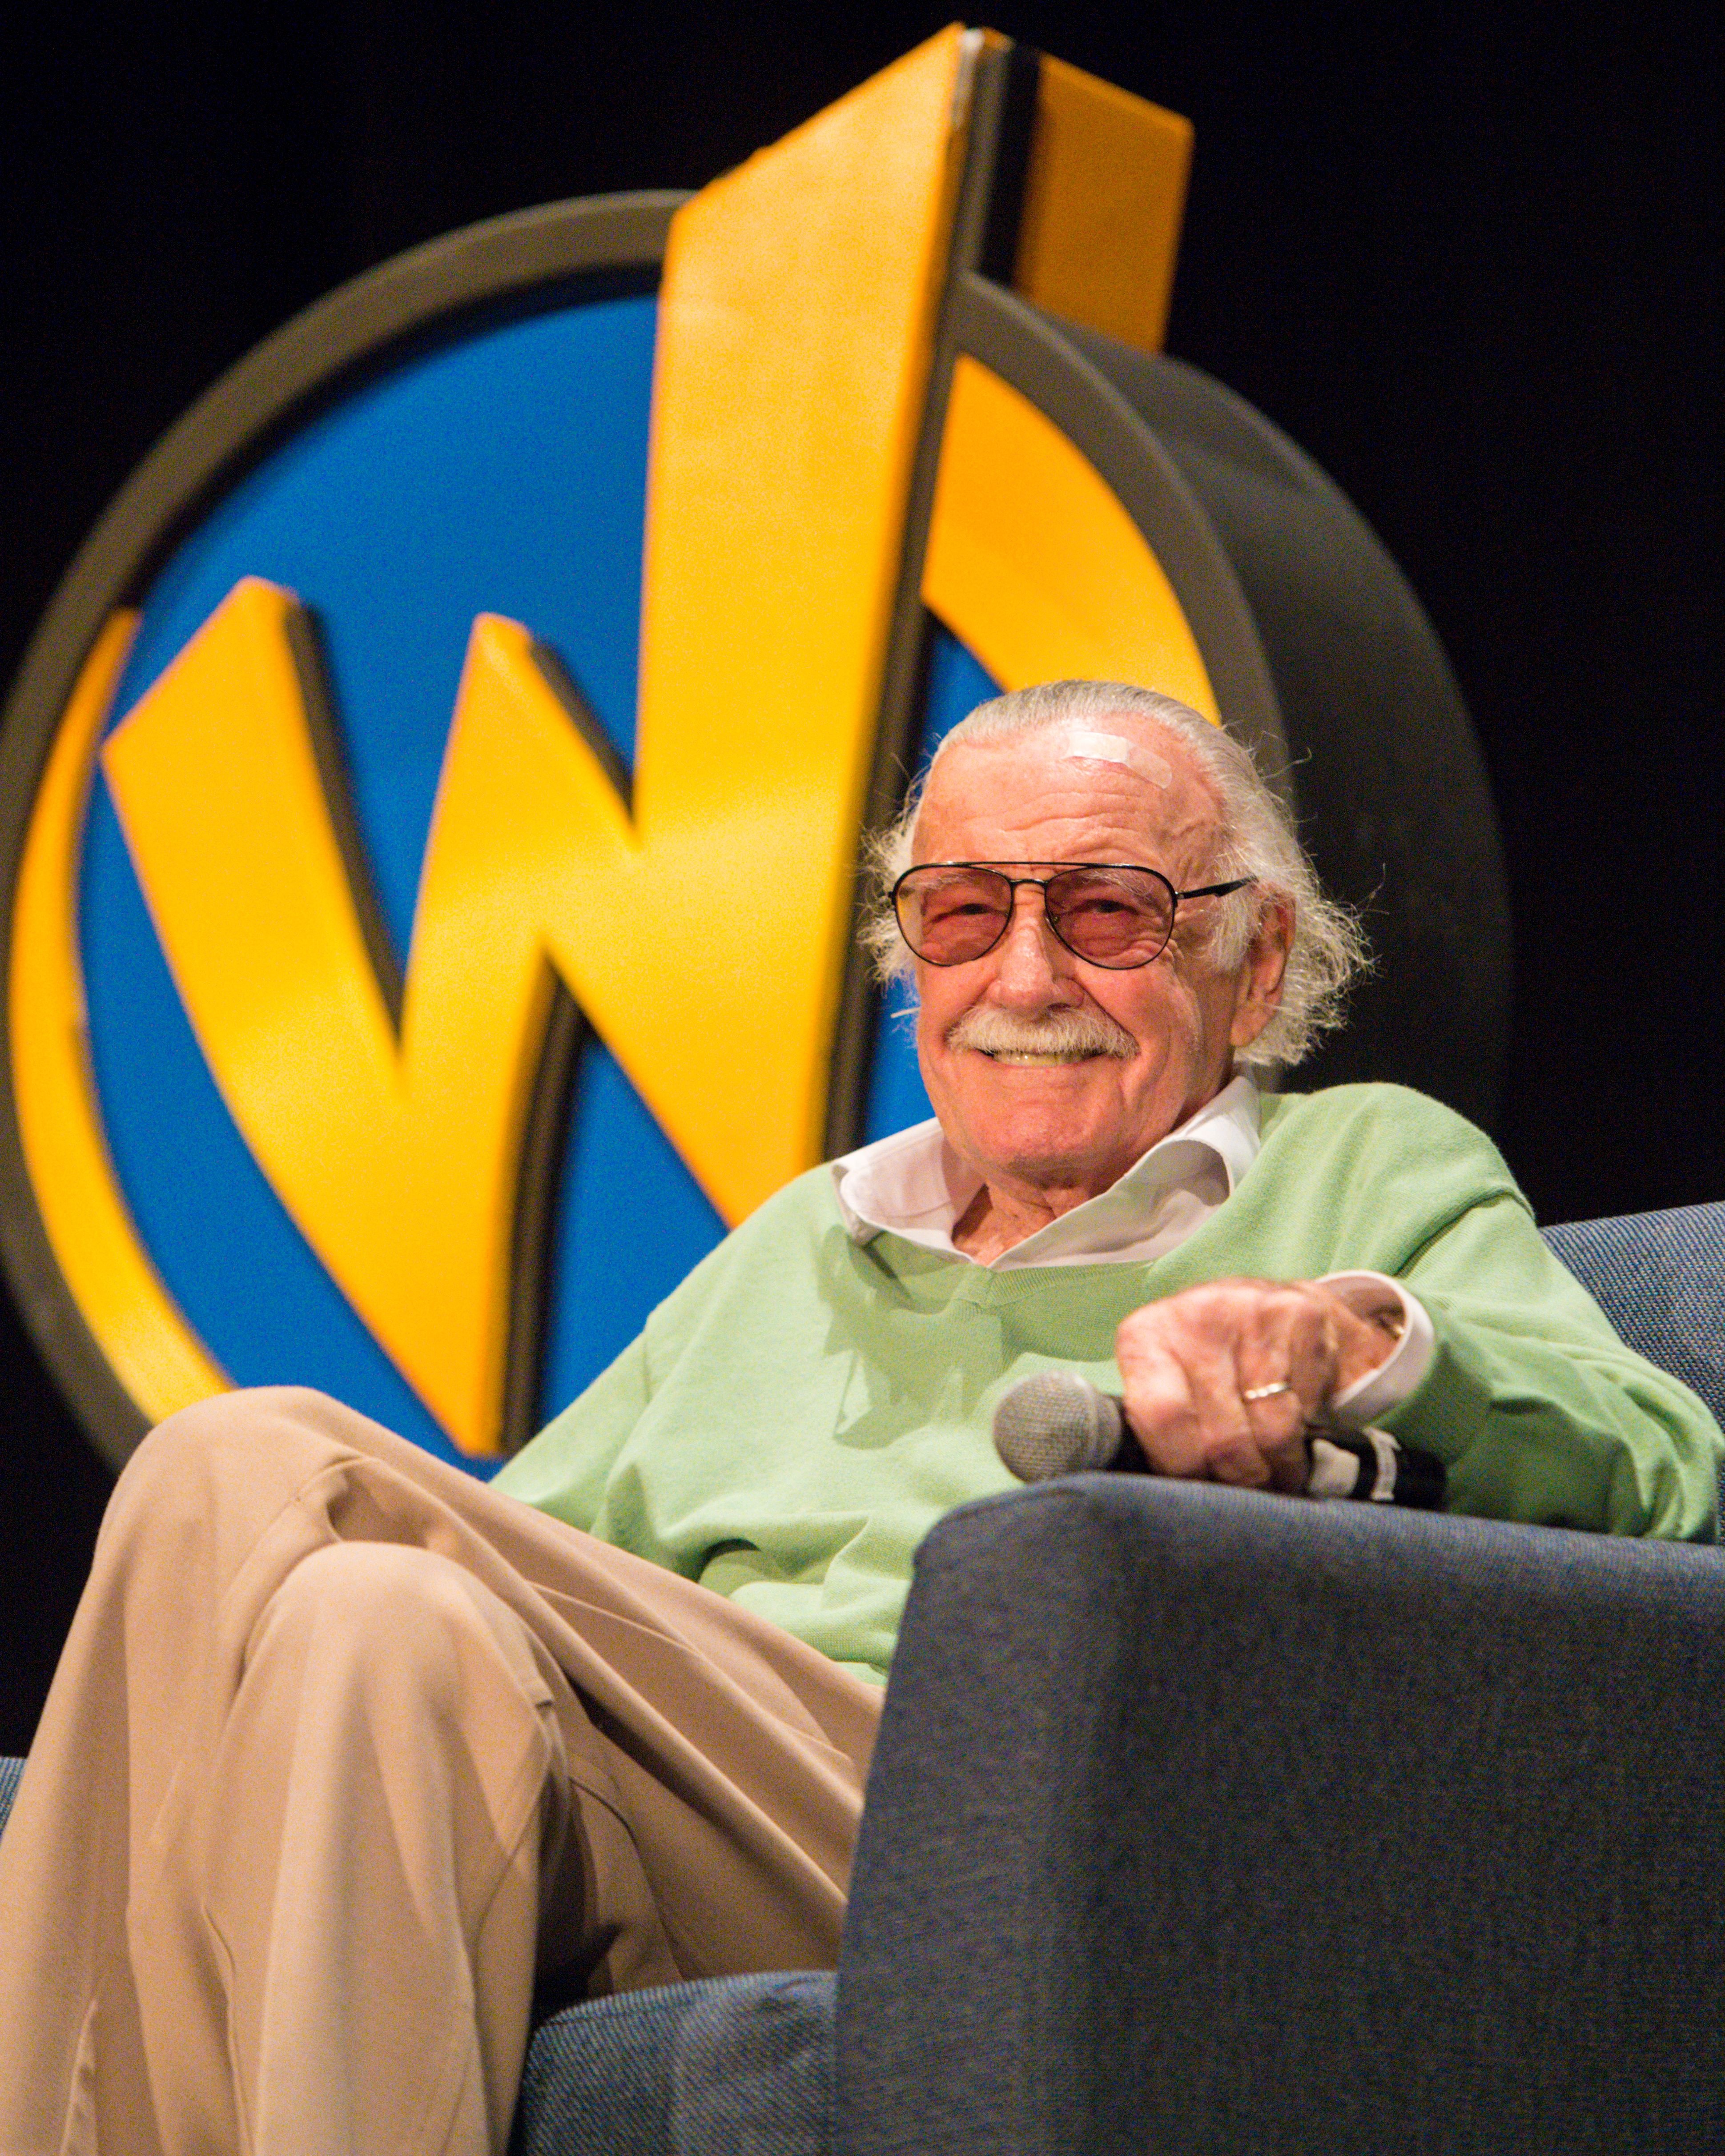 Stan Lee at the Wizard World Comic Con at Ernest N. Morial Convention Center on January 6, 2018 in New Orleans, Louisiana. | Source: Getty Images